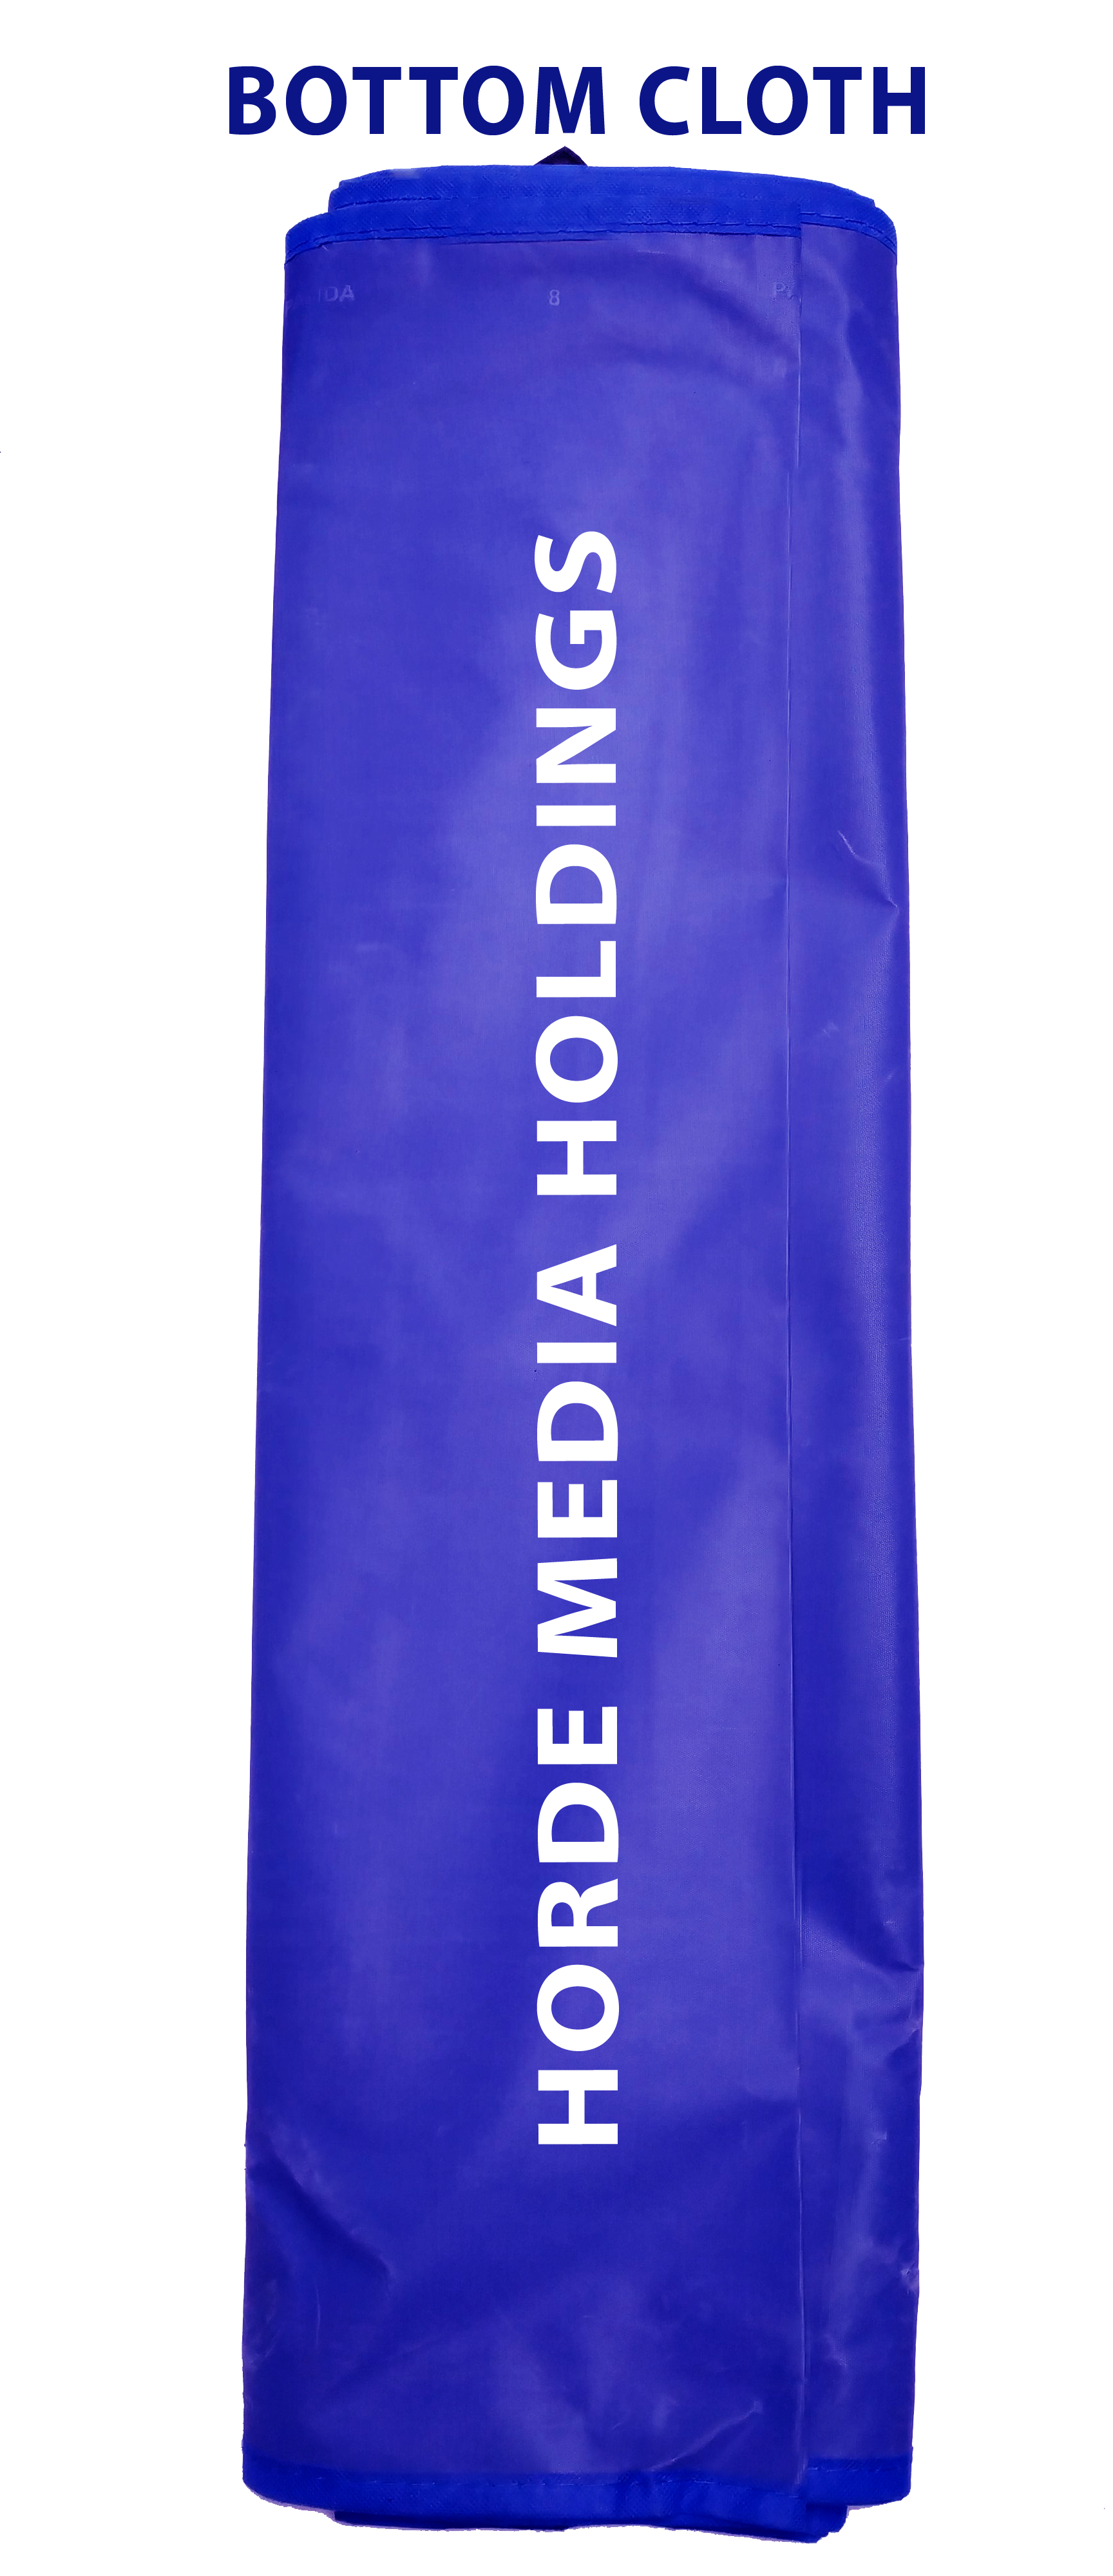 6X6X7 ft Promotional Canopy Tent for Advertising